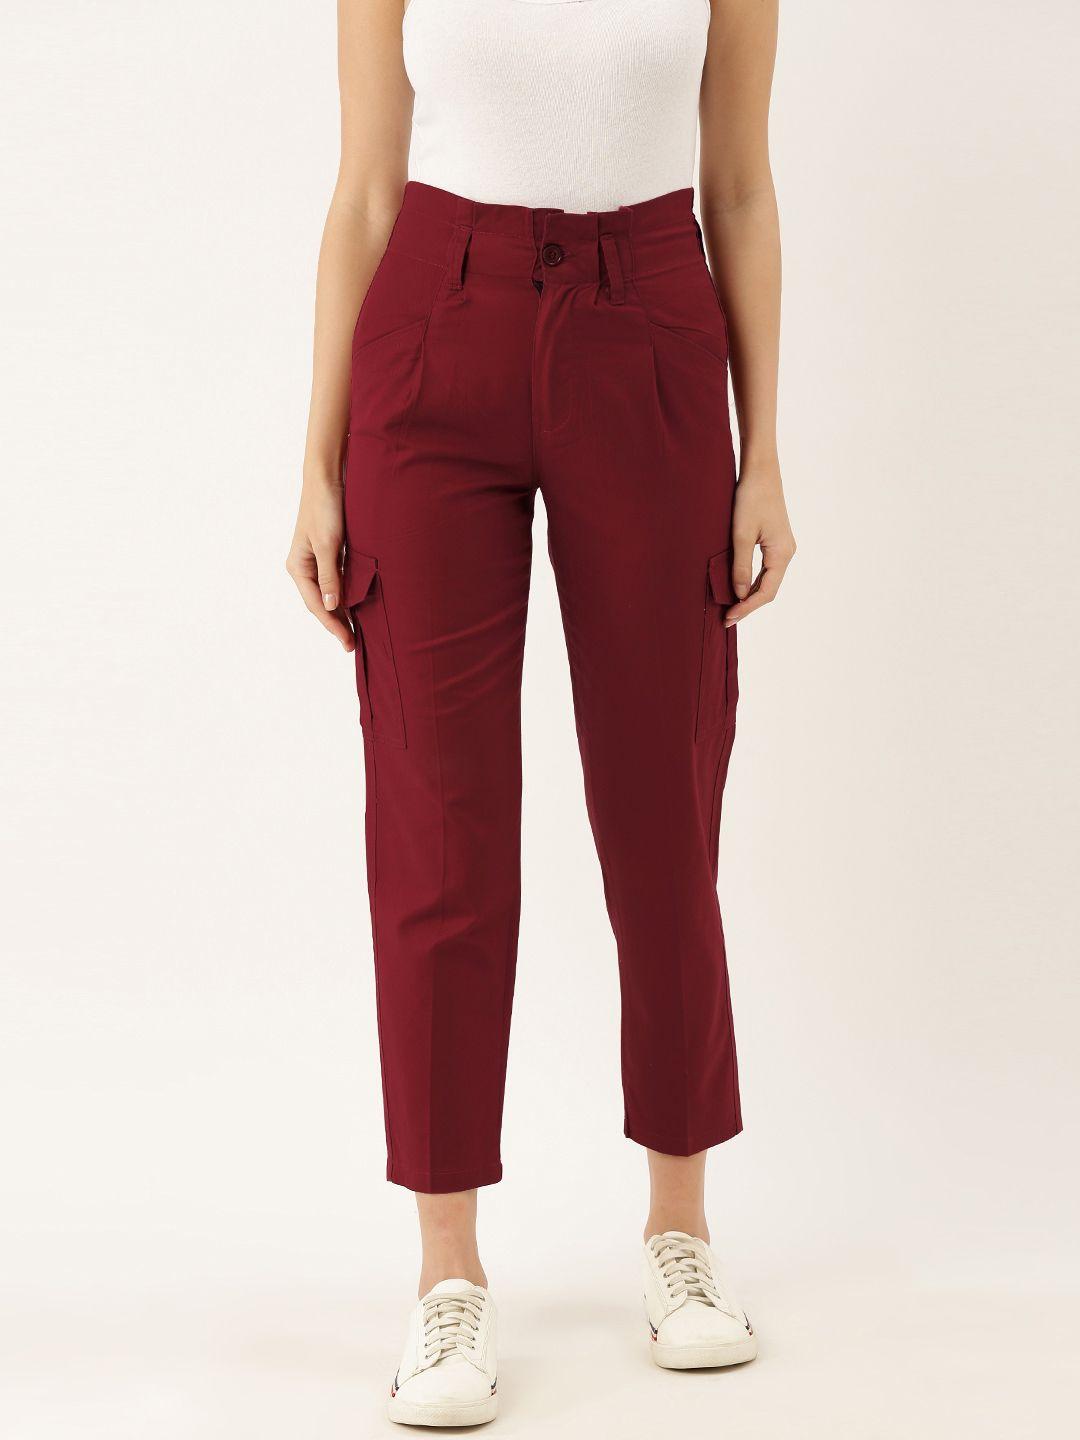 the-dry-state-women-maroon-regular-fit-solid-cropped-cargos